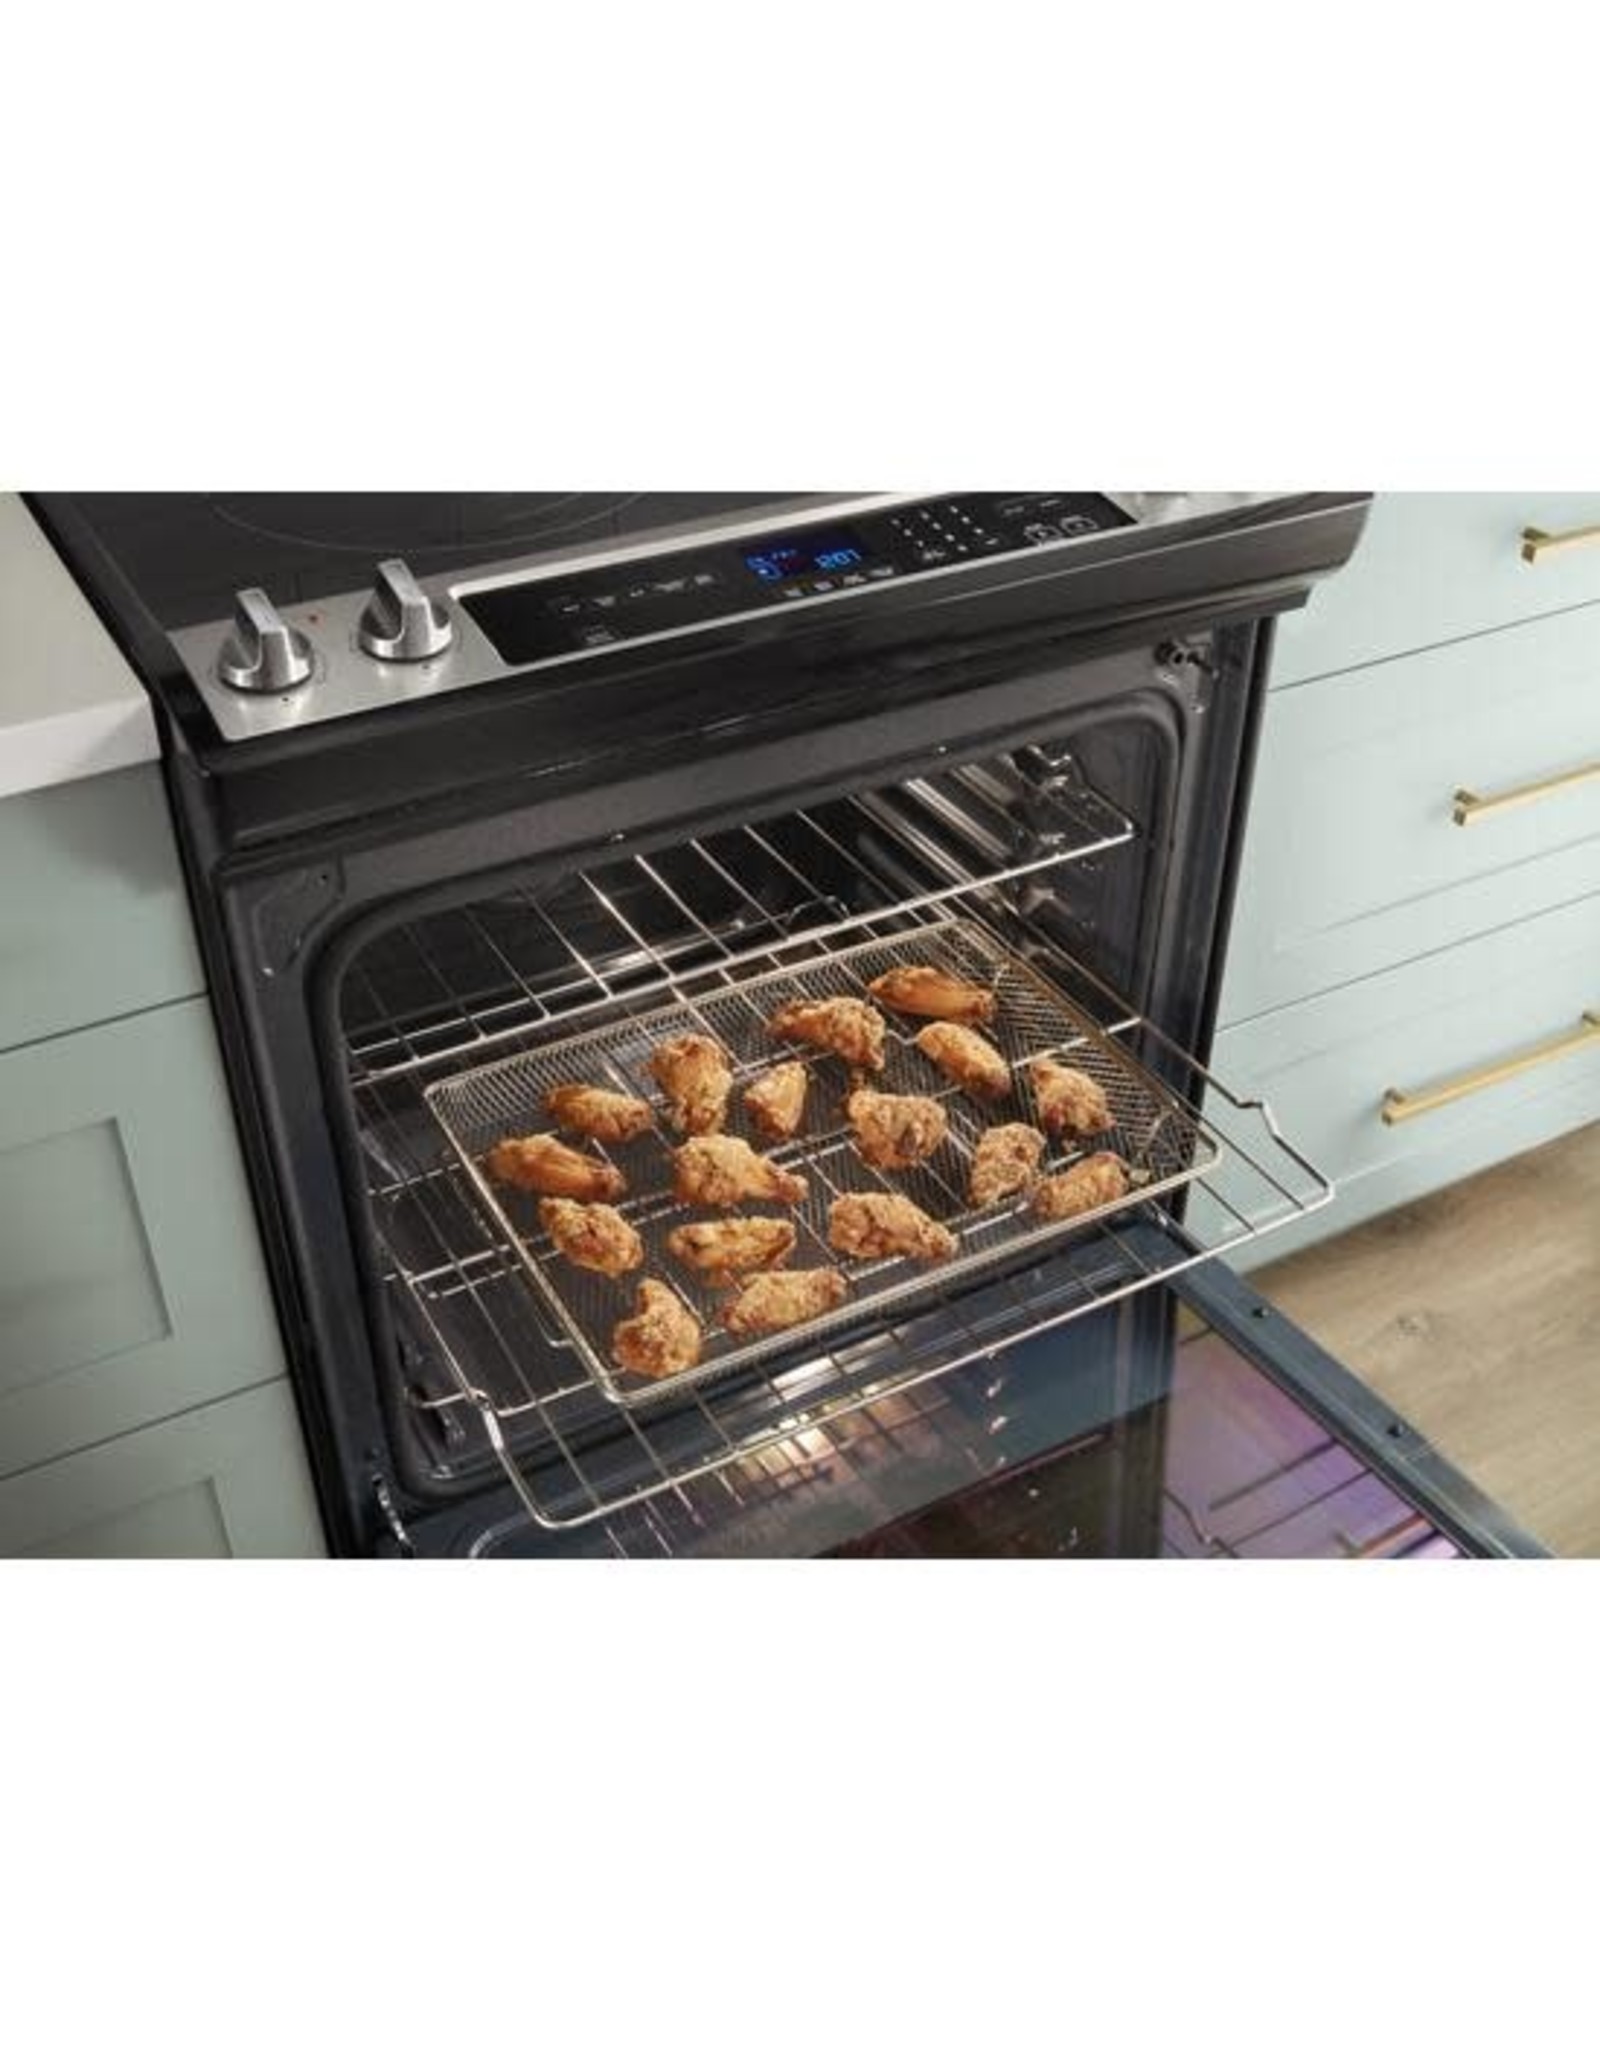 WHIRLPOOL GD WEE745H0LZ 6.4 cu. ft. Single Oven Electric Range with Air Fry Oven in Fingerprint Resistant Stainless Steel